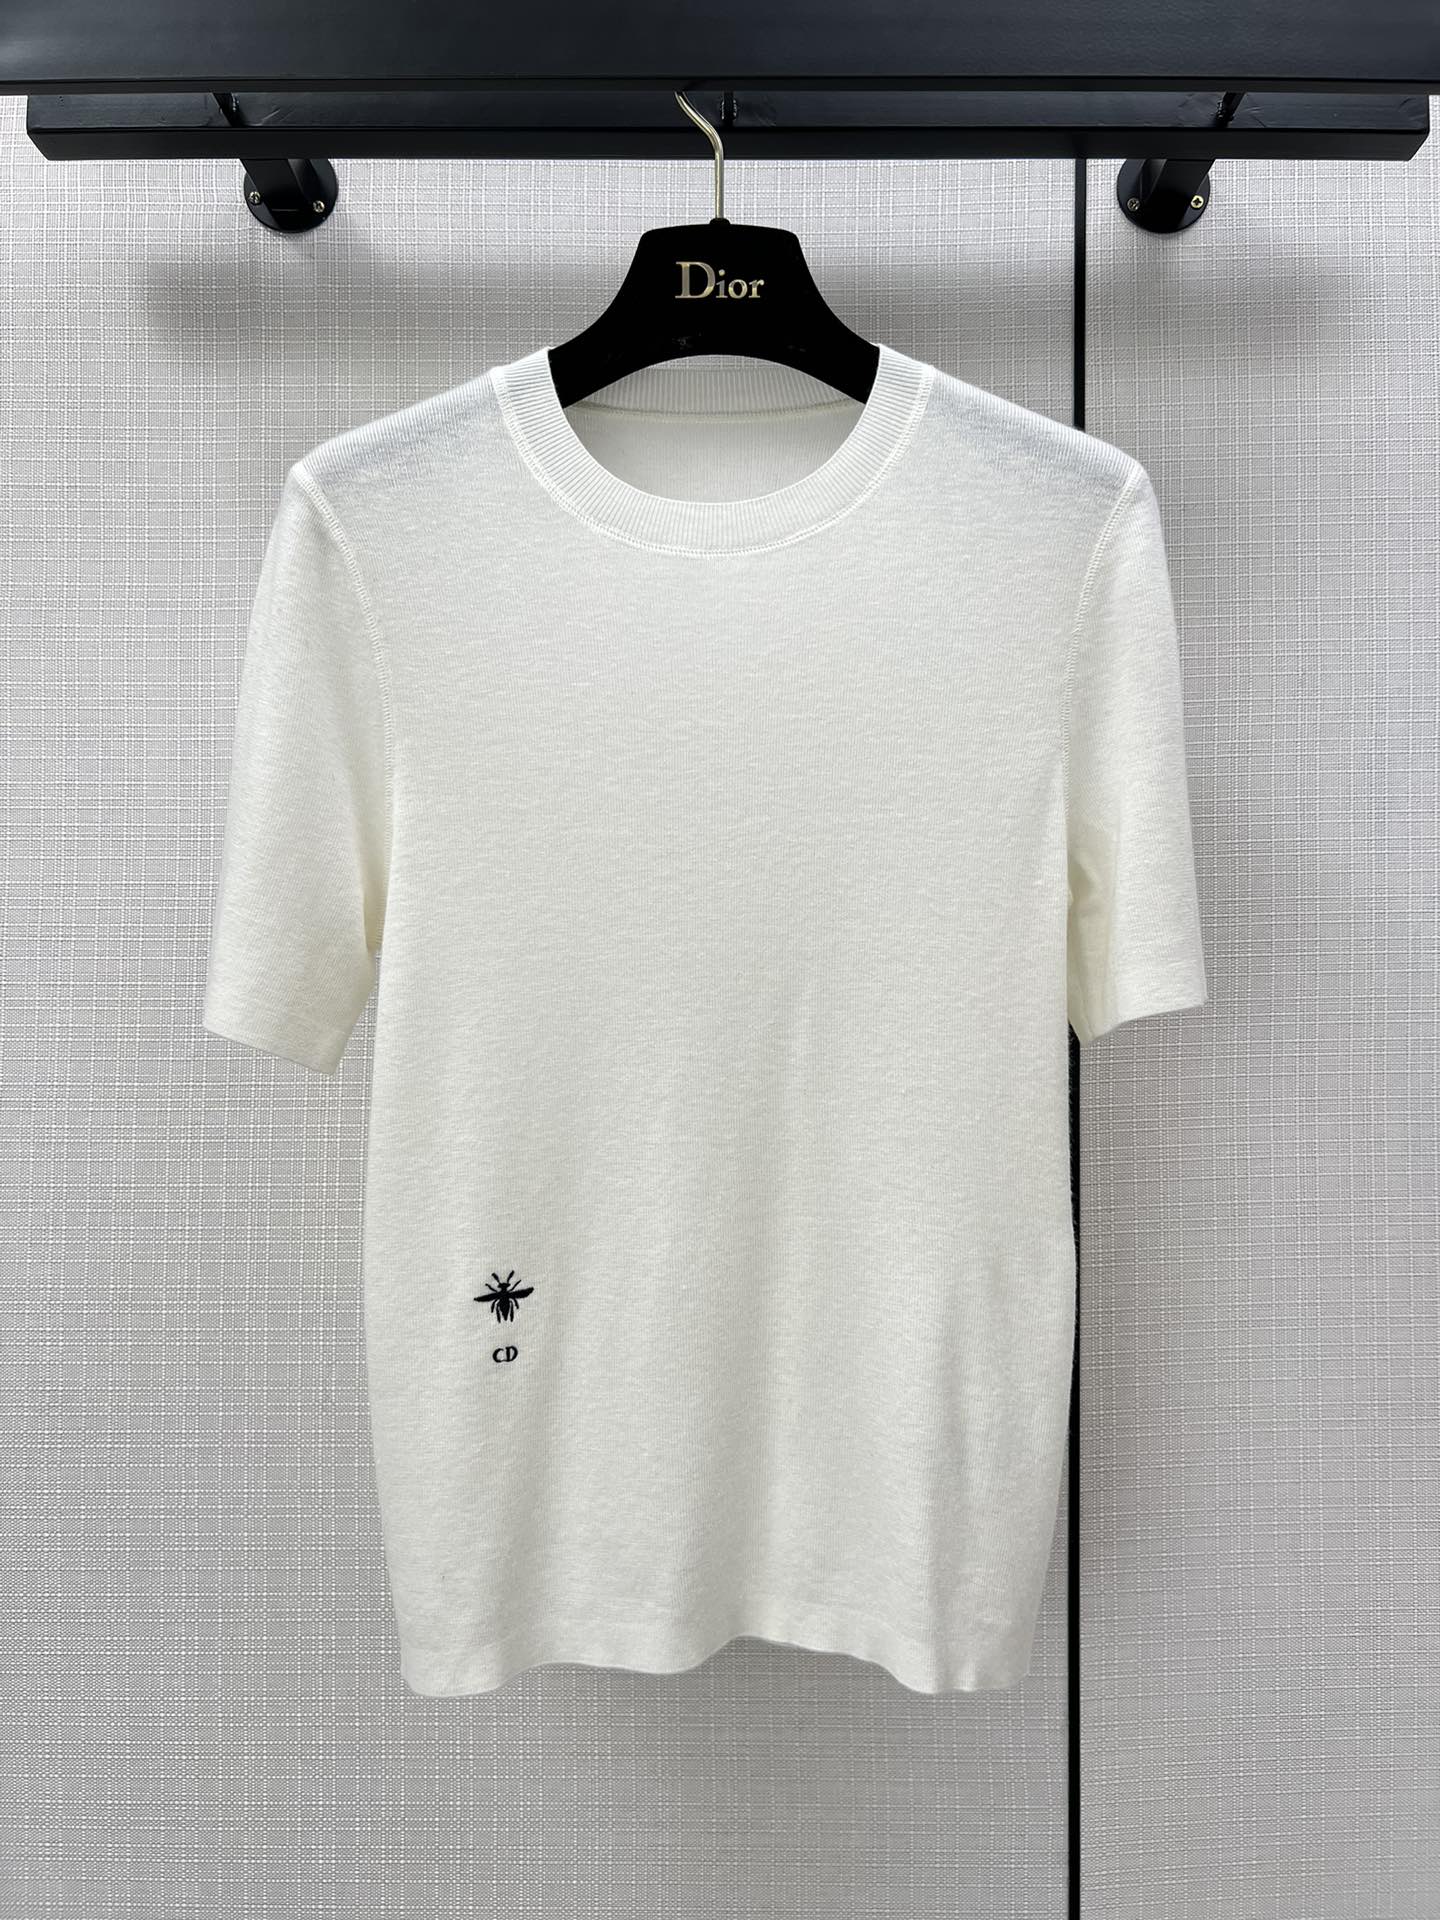 Dior Clothing Shirts & Blouses Highest quality replica
 Embroidery Knitting Wool Spring Collection